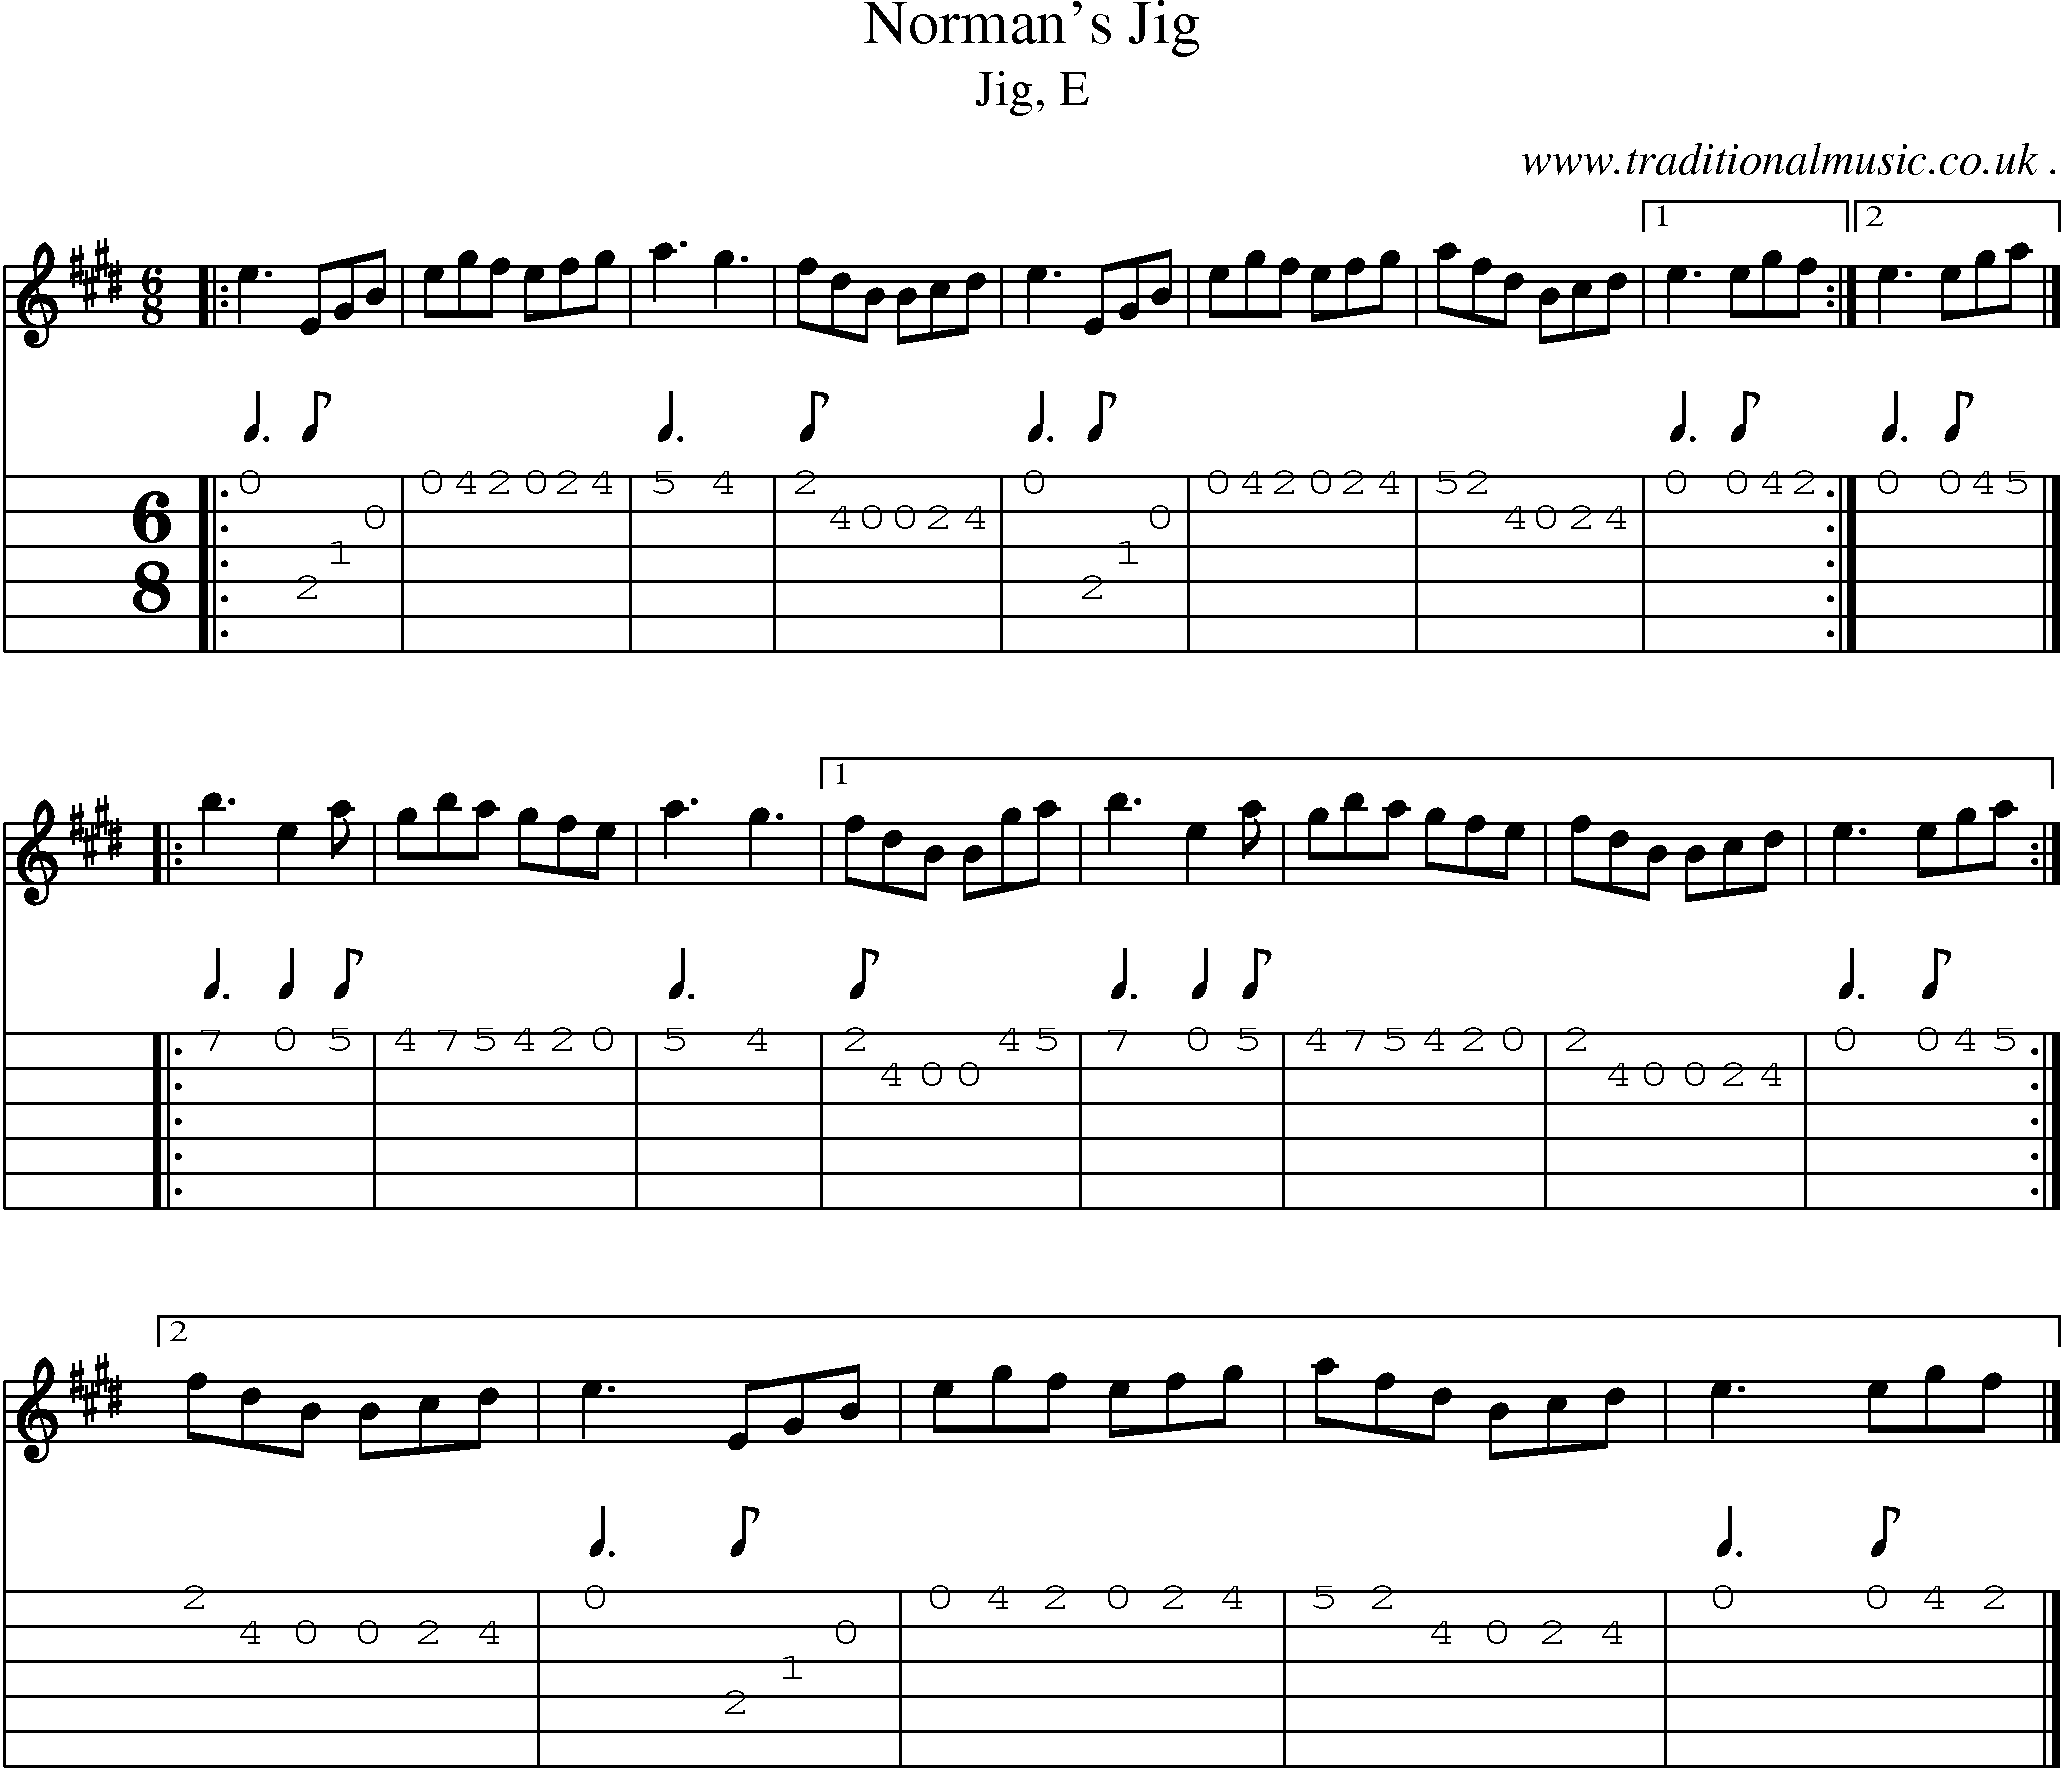 Sheet-music  score, Chords and Guitar Tabs for Normans Jig